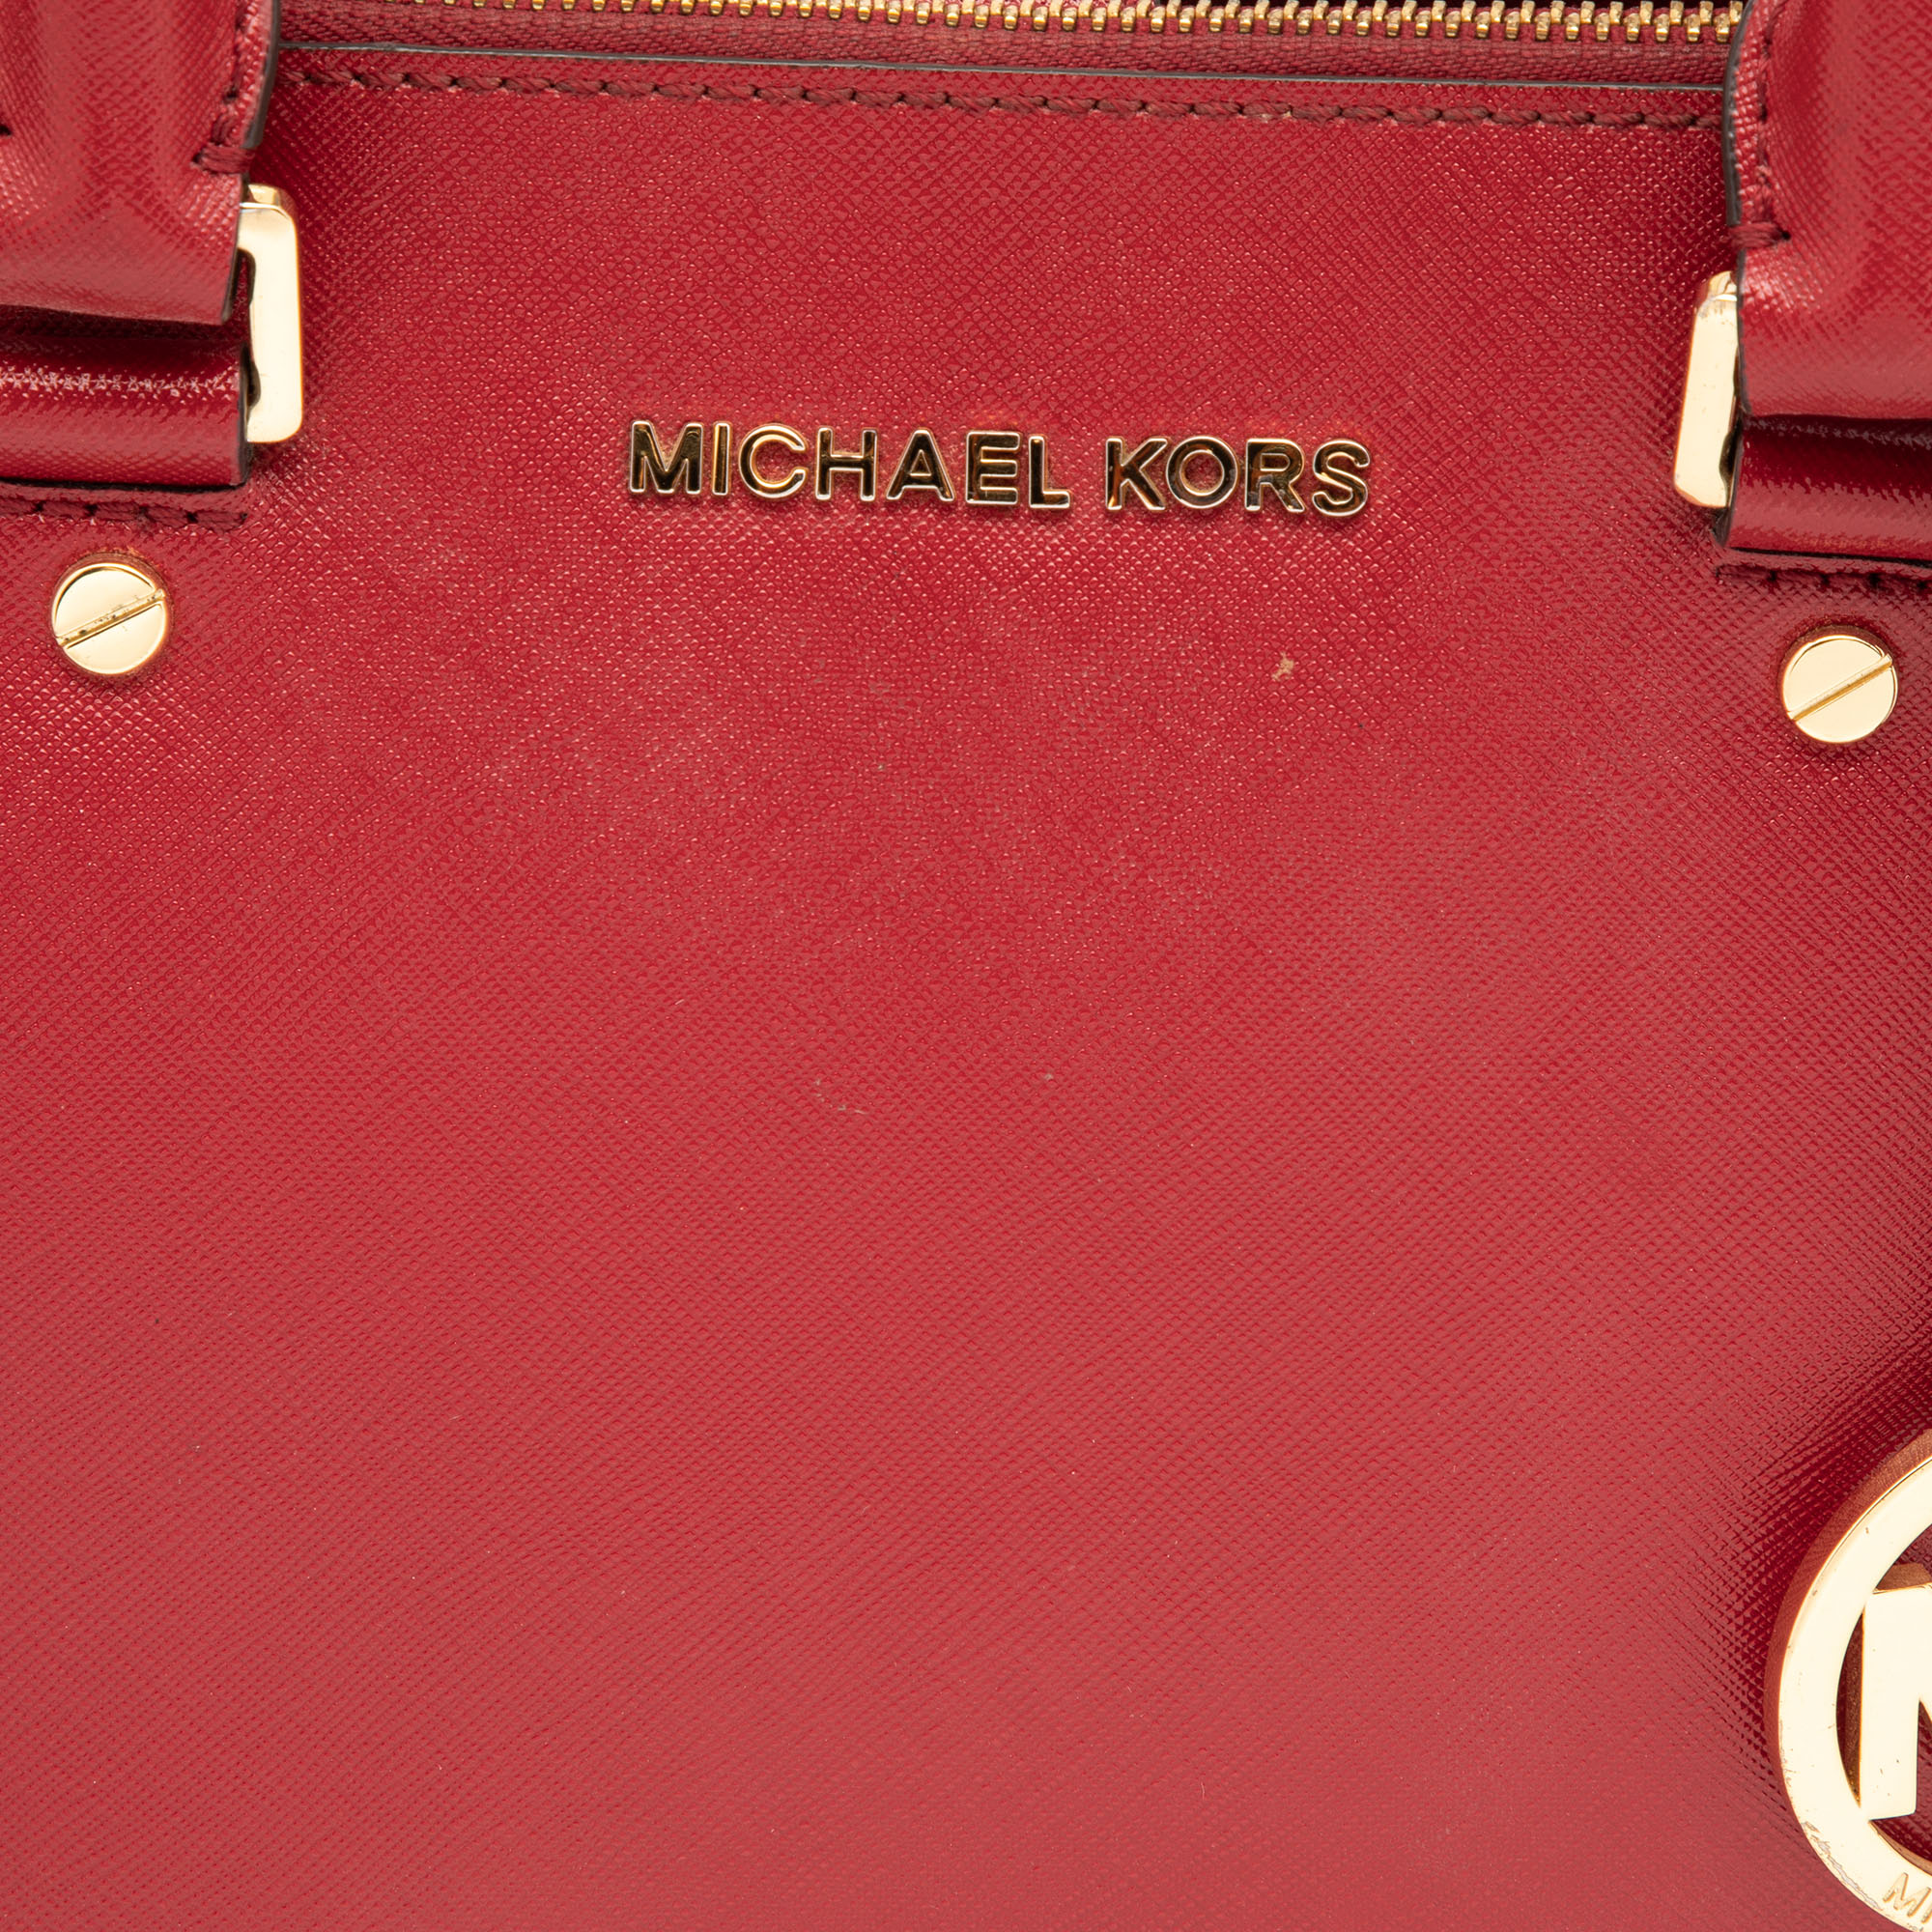 Michael Michael Kors Red Leather Jet Set Double Zip Tote